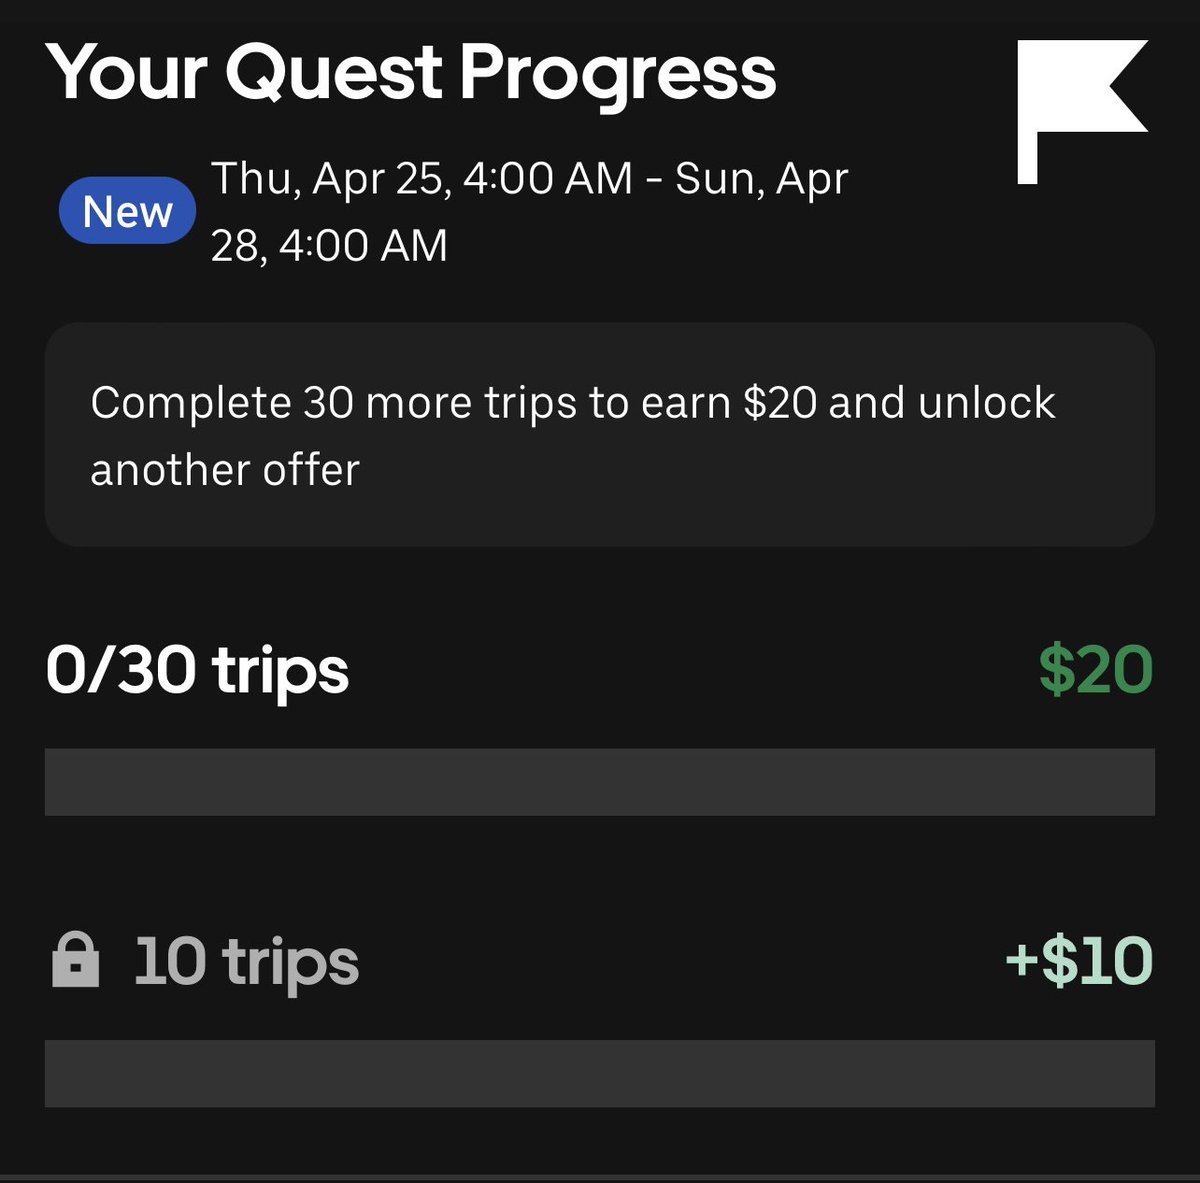 It’s been years since @Uber Quests were this low & I used to say then, “it’s just gas money.” 

Well, I guess I’ll now have to say, “it’s just charging money.” But I still have two more months of FREE @TeslaSuperCharg ⚡️ So I guess it’s free lunch money today!

#weekendwarrior